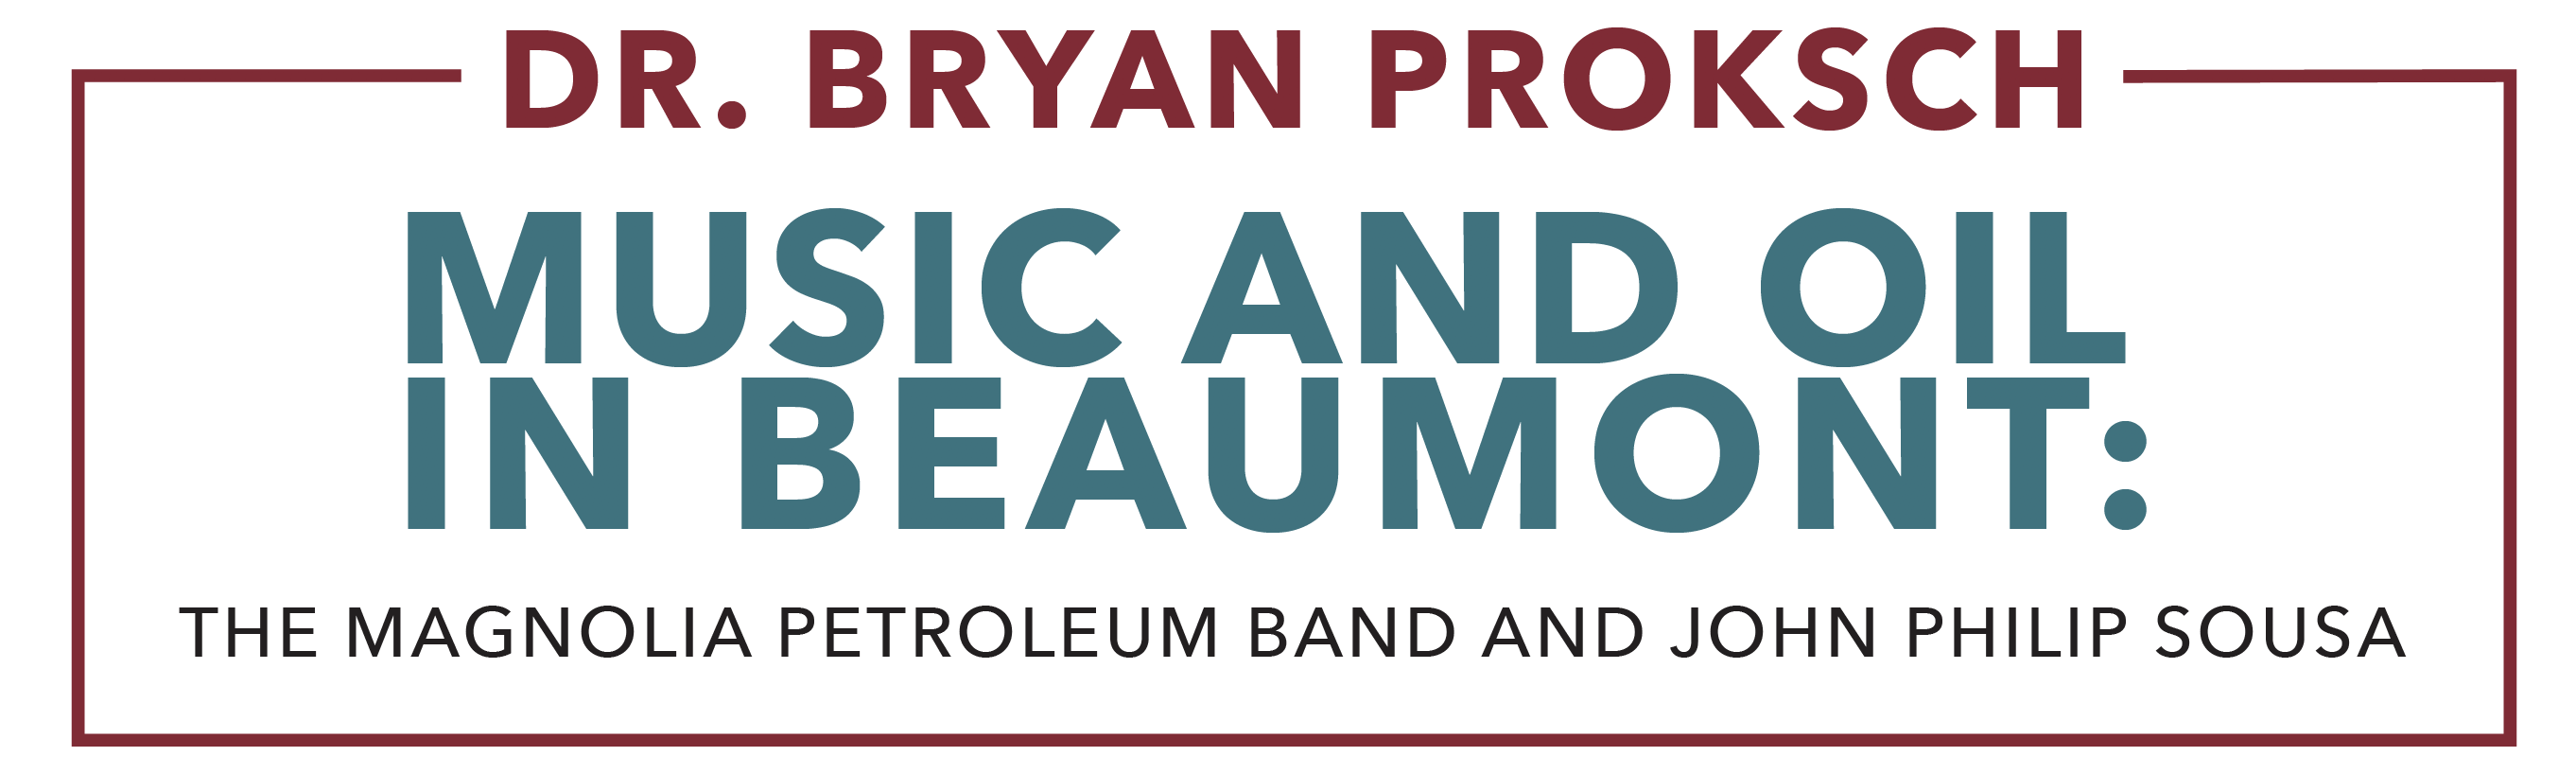 Dr. Bryan Proksch lecture Music and Oil in Beaumont, the Magnolia Petroleum Band and John Philip Souza